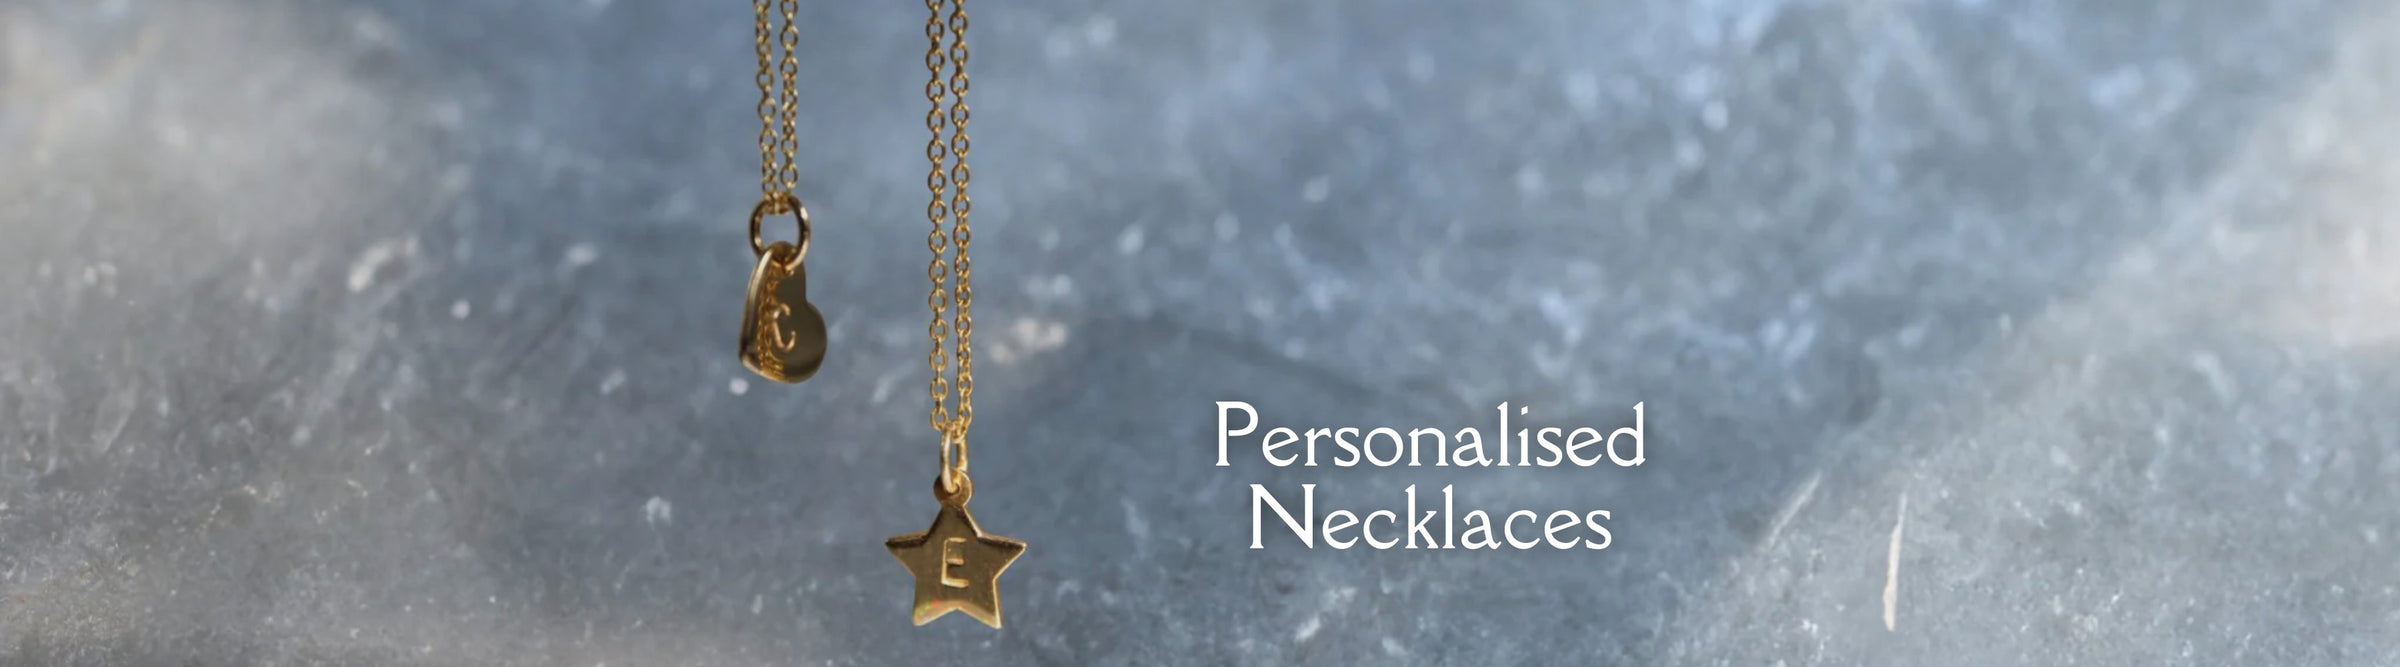 personalised necklaces banner image